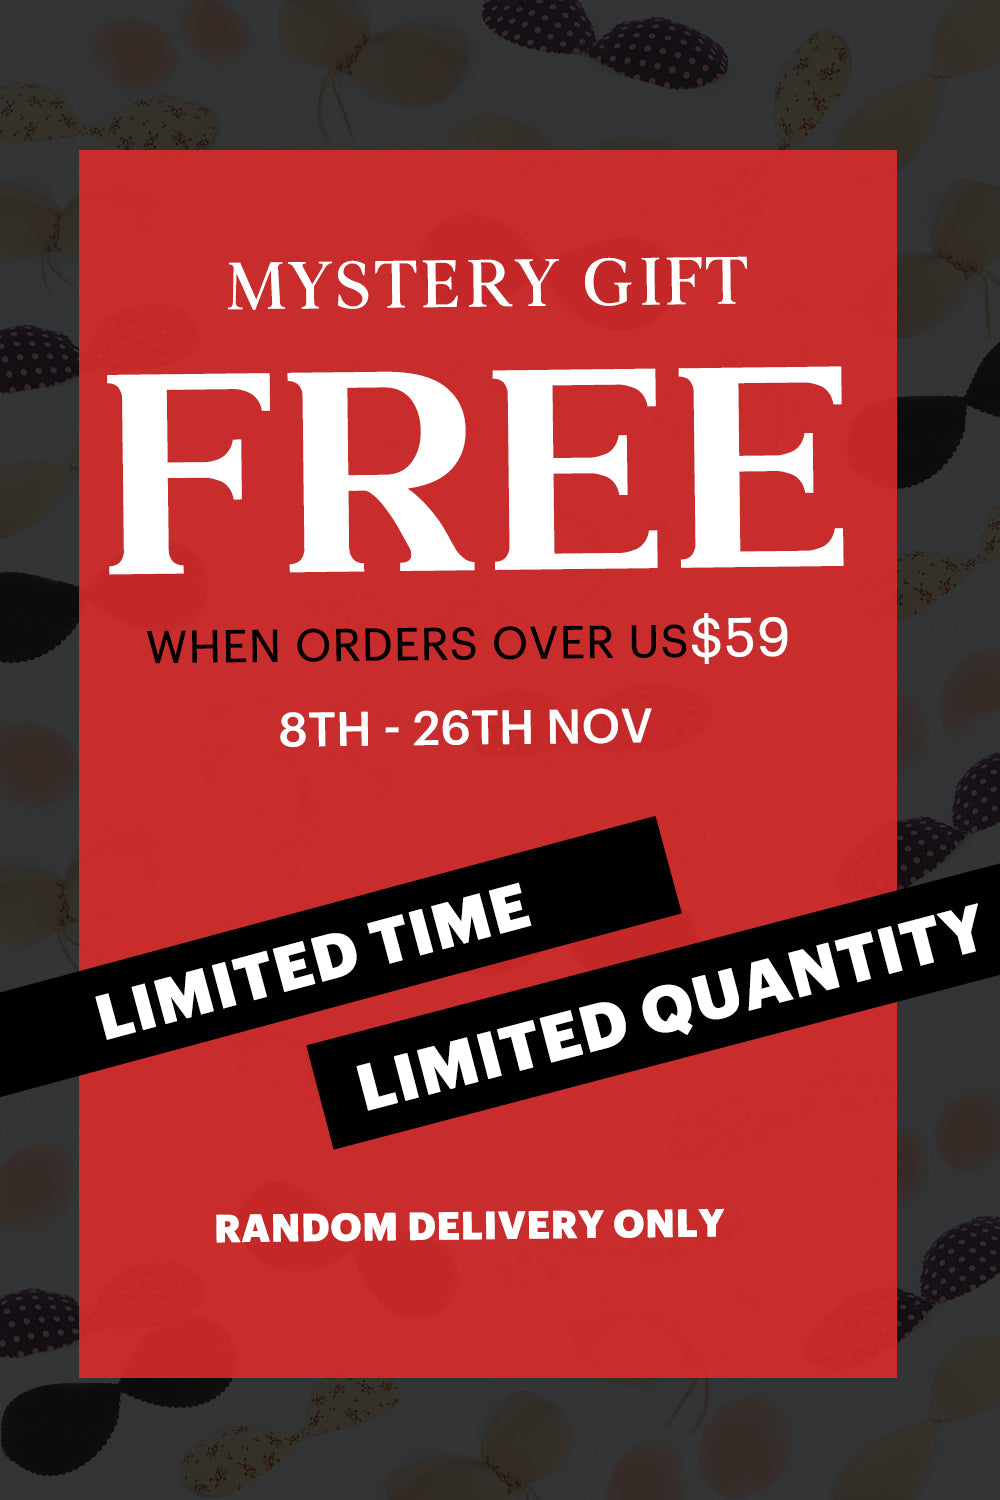 FREE GIFT PRODUCT(FREE MYSTERY GIFT)